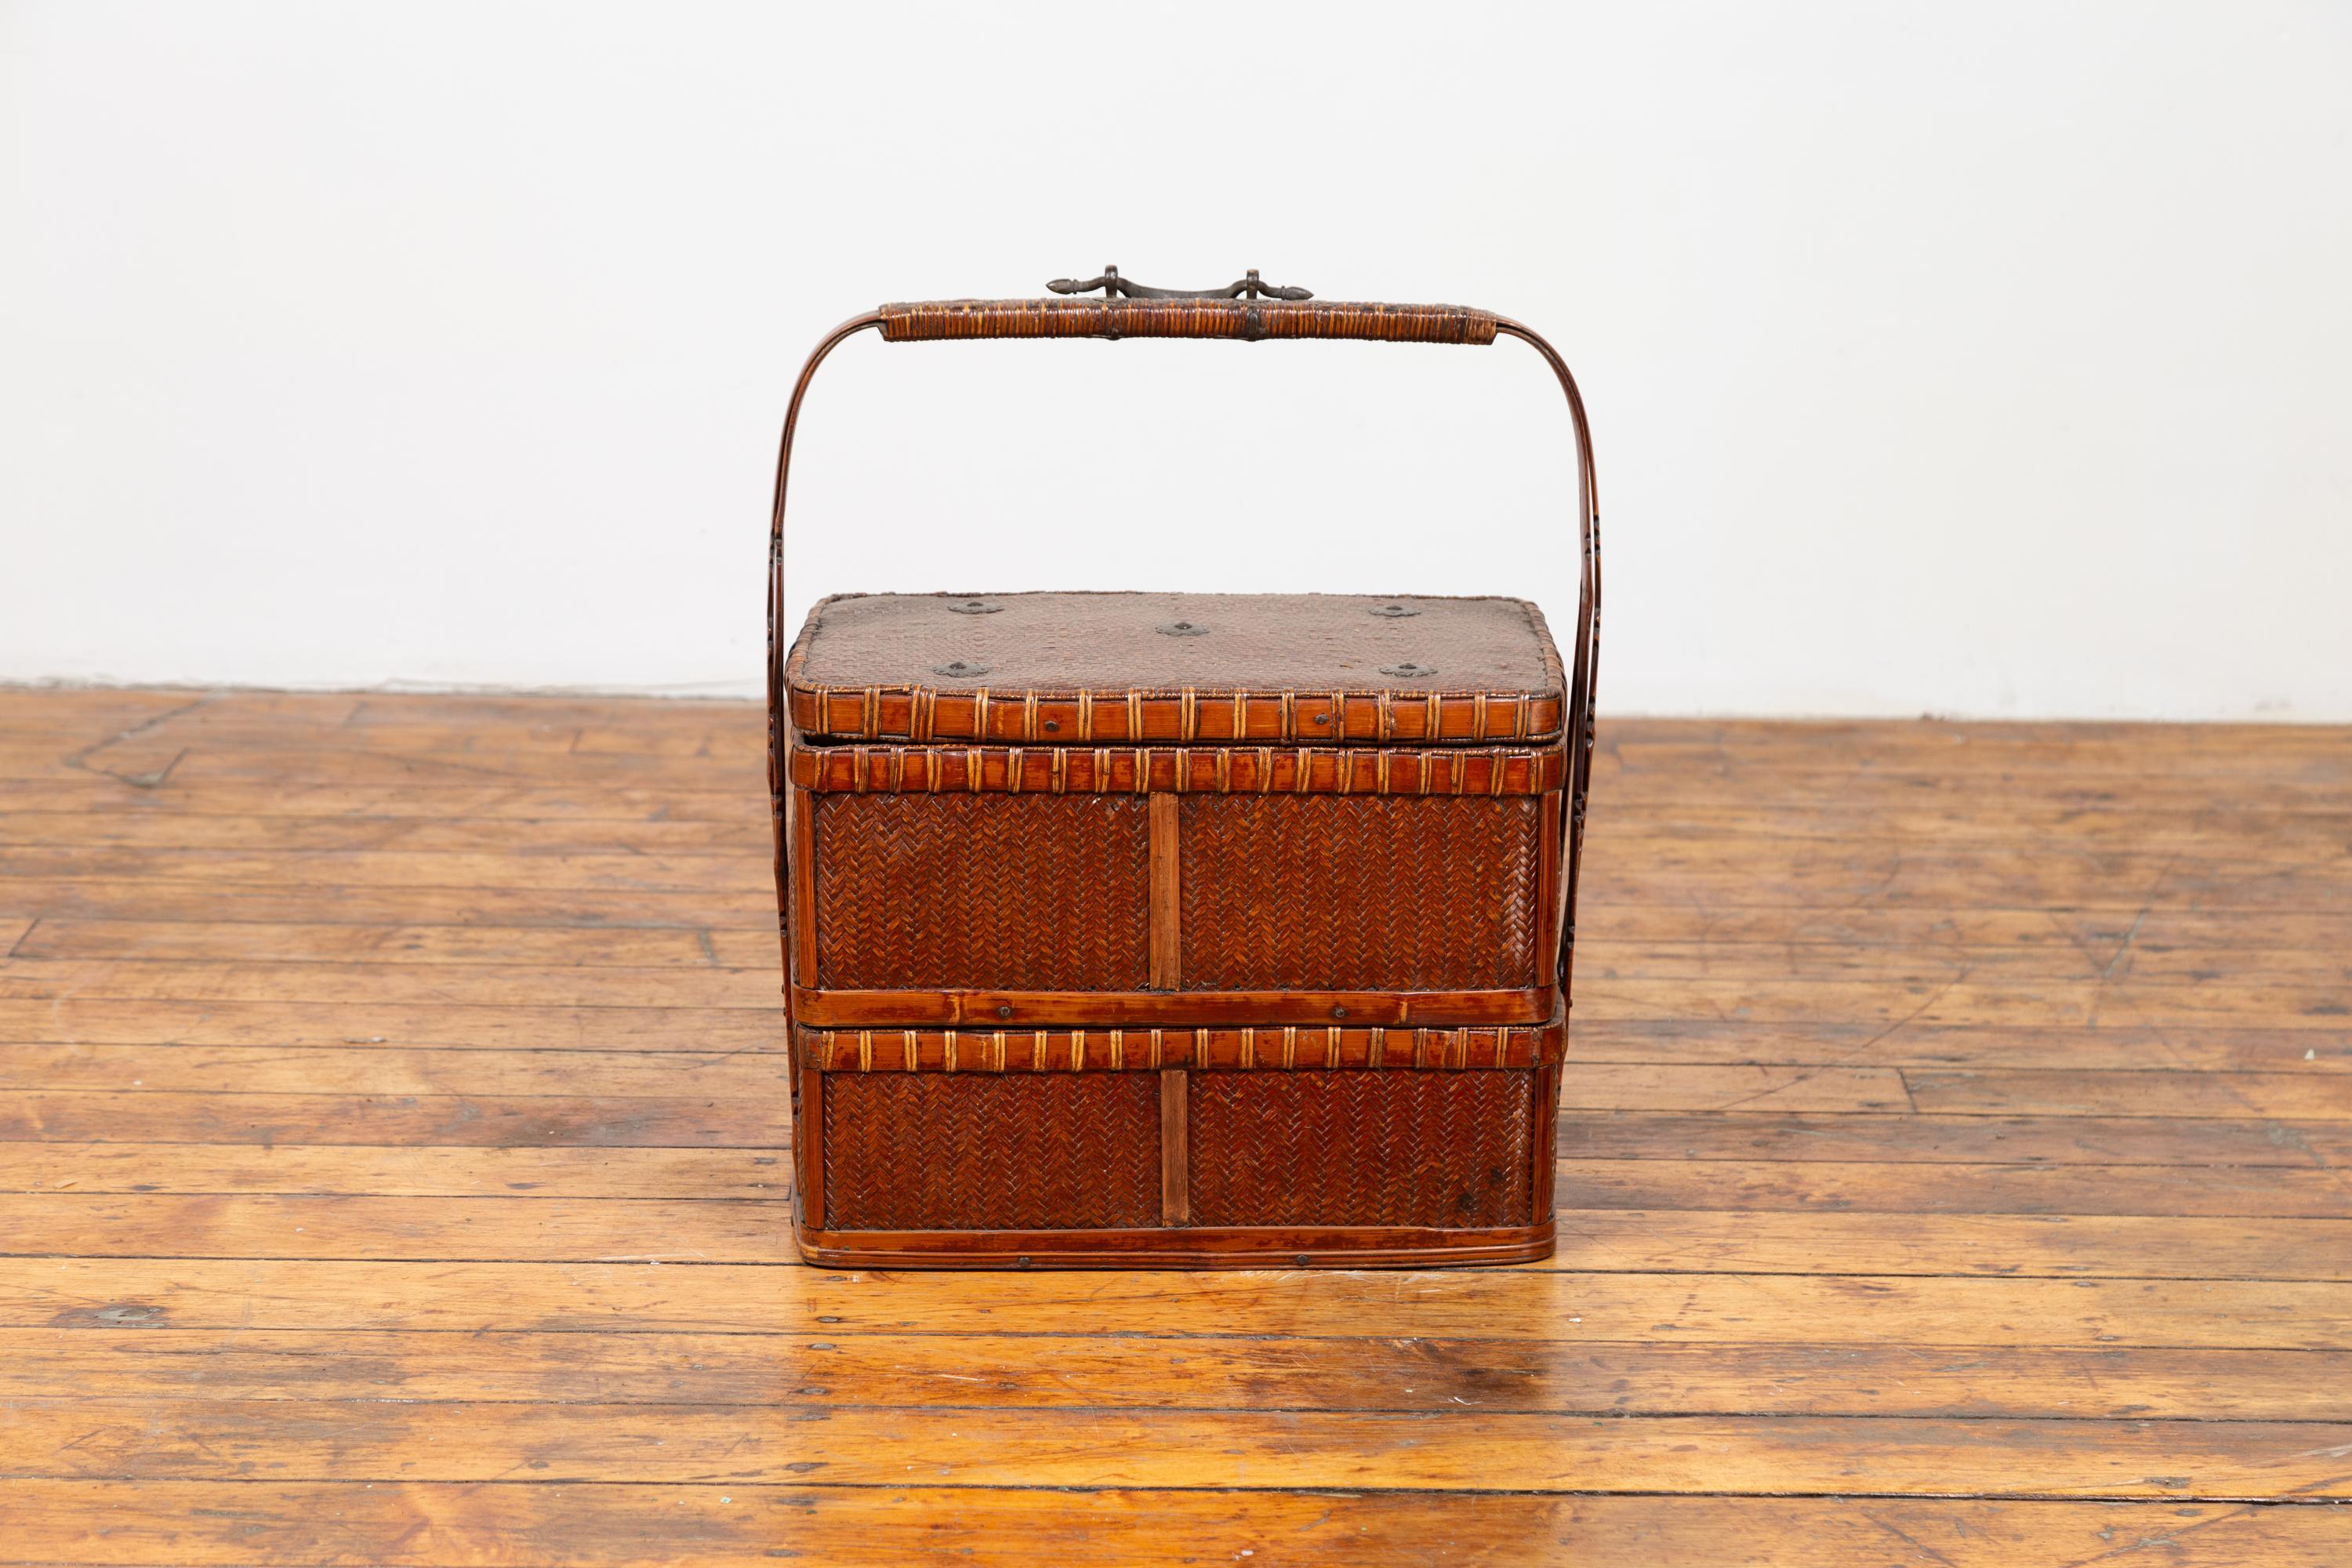 A Chinese vintage small tiered rattan and bamboo picnic basket from the mid-20th century, with large handle. Born in China during the midcentury period, this charming picnic basket features two independent sections, topped with a rectangular lid.